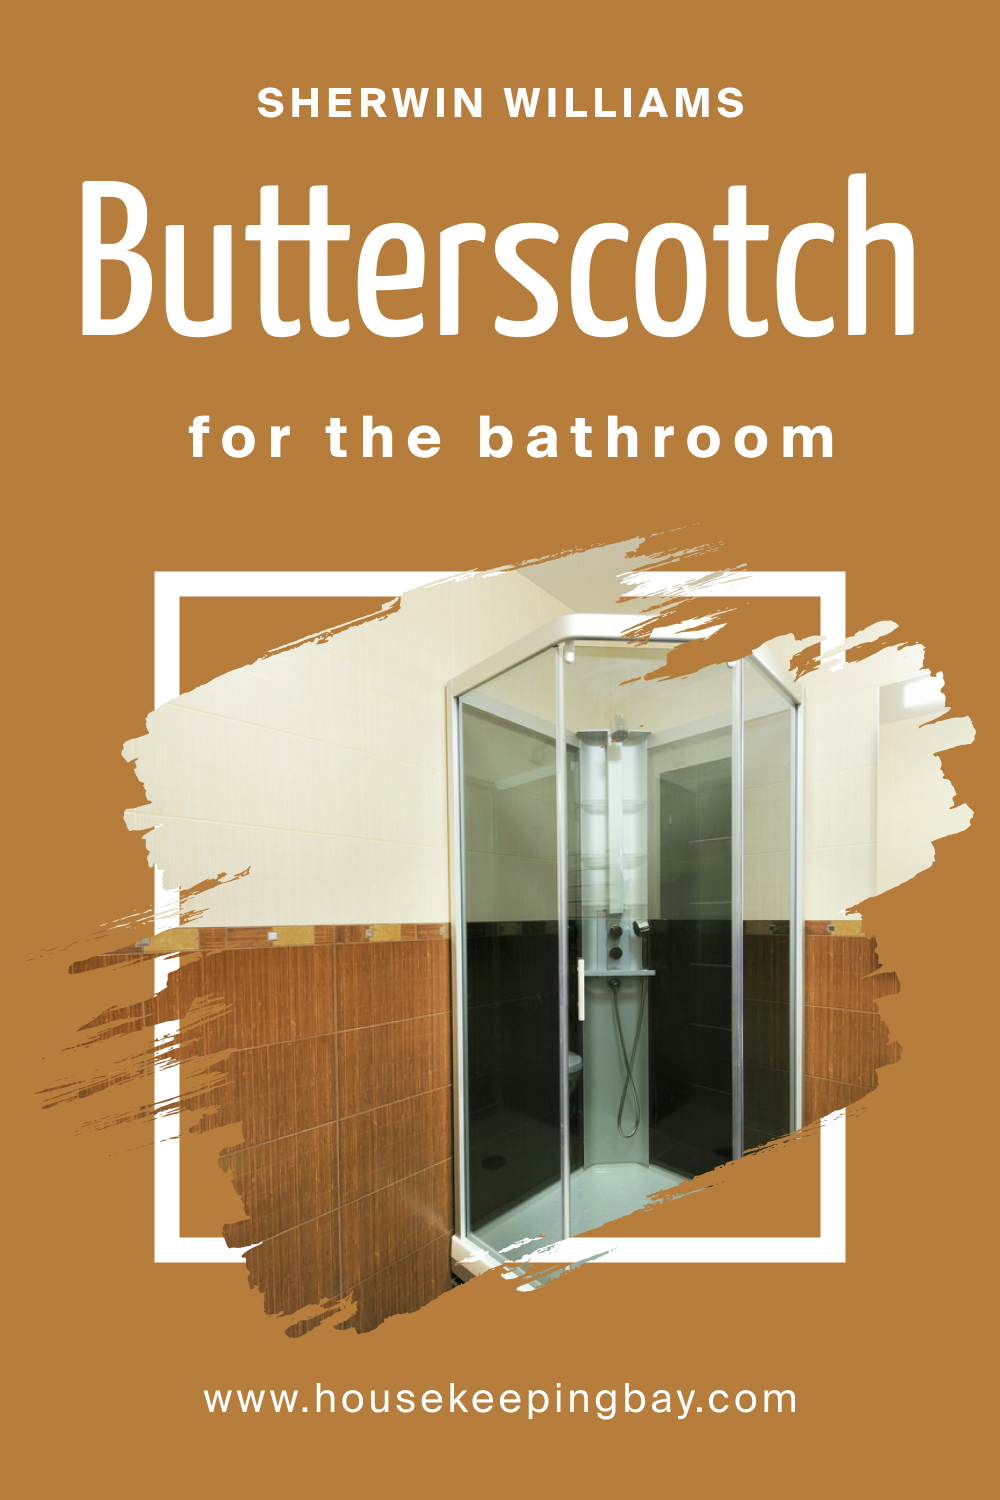 Sherwin Williams. SW 6377 Butterscotch For the Bathroom